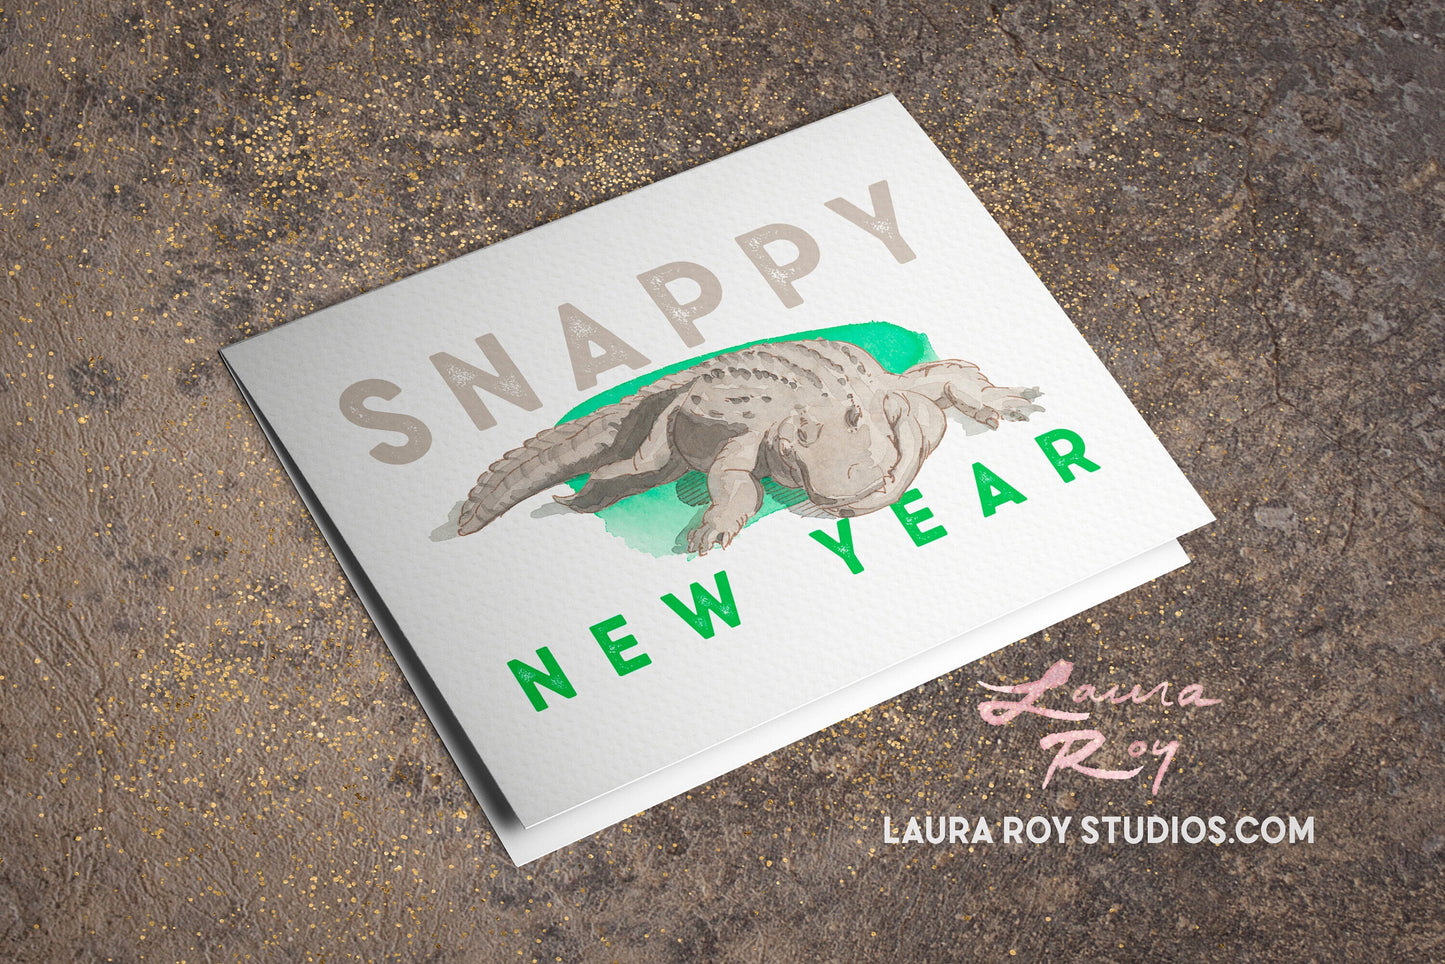 Snappy New Year Card/Set